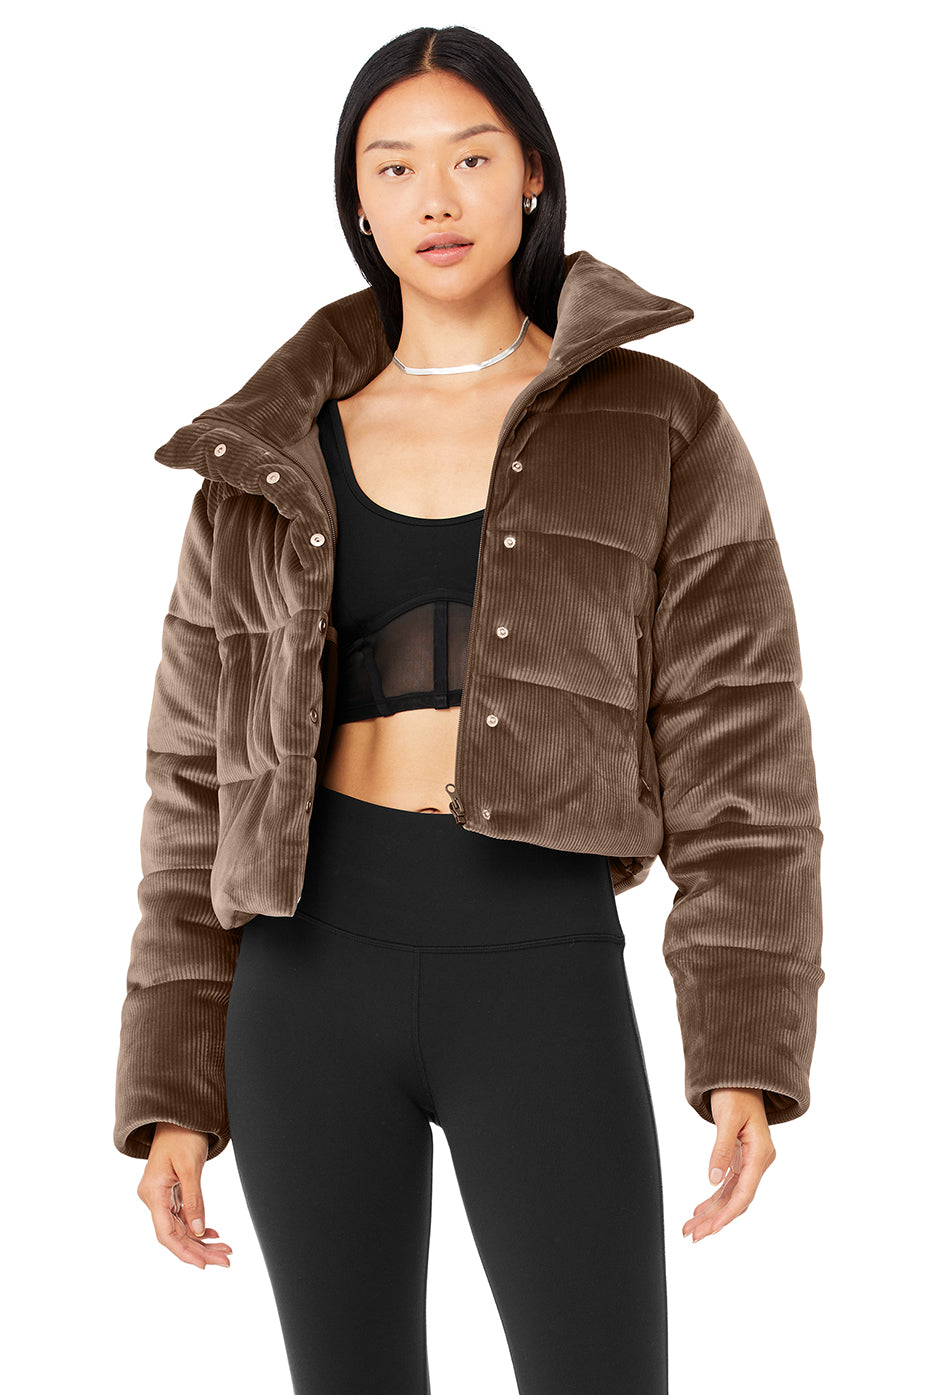 Stay Warm in Style with the Alo Yoga Gold Rush Puffer